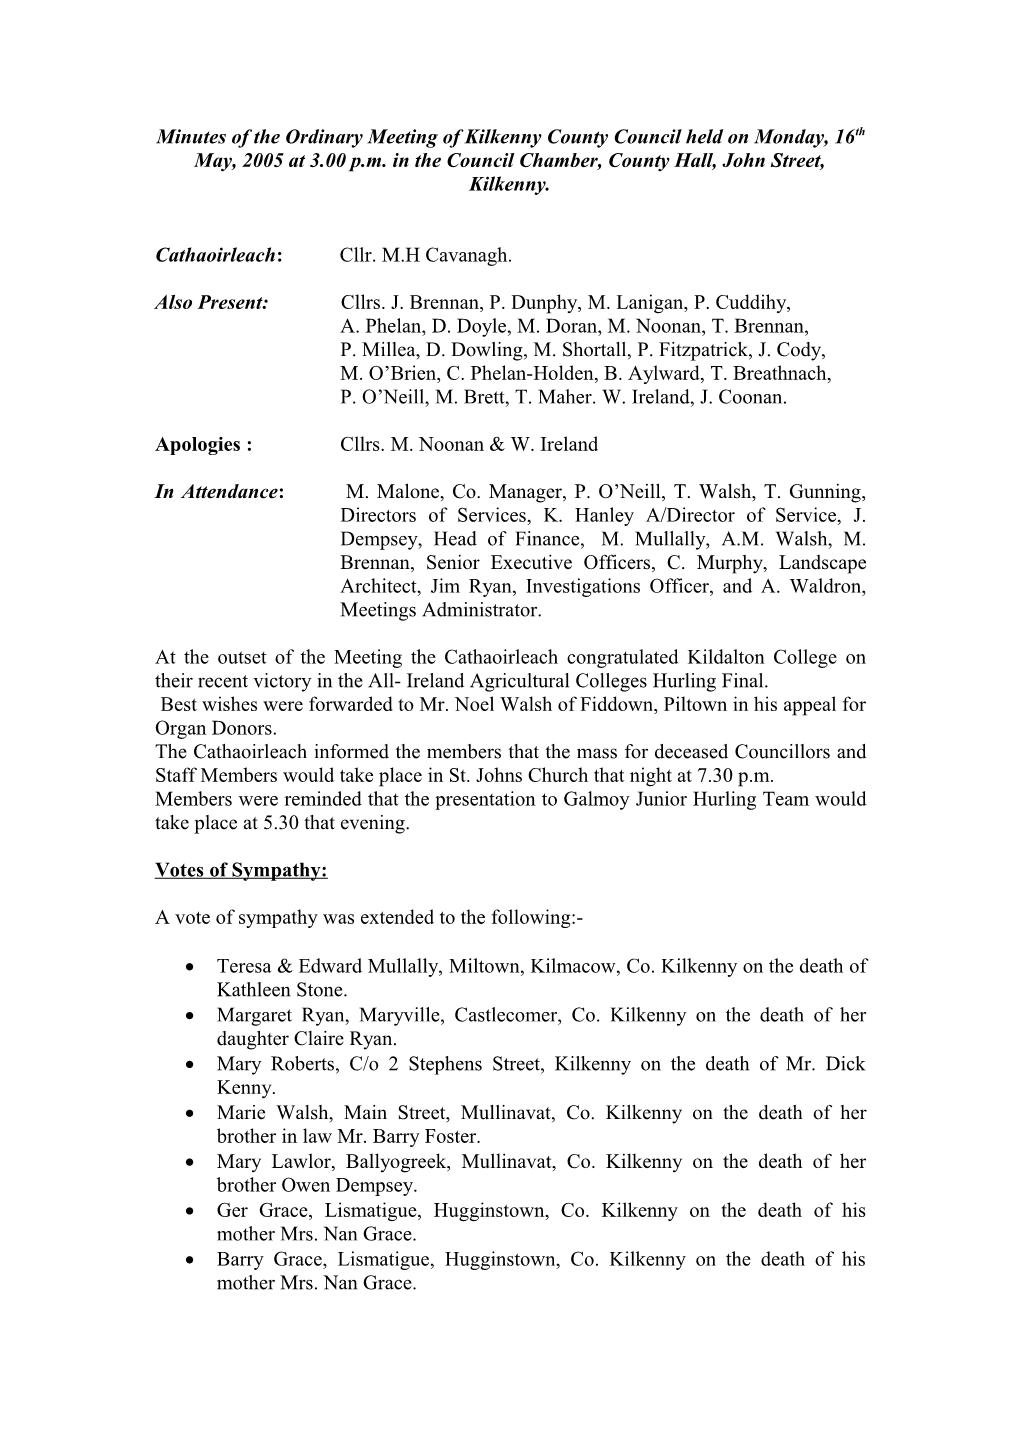 Minutes of the Ordinary Meeting of Kilkenny County Council Held on Monday, 16Th May, 2005 at 3